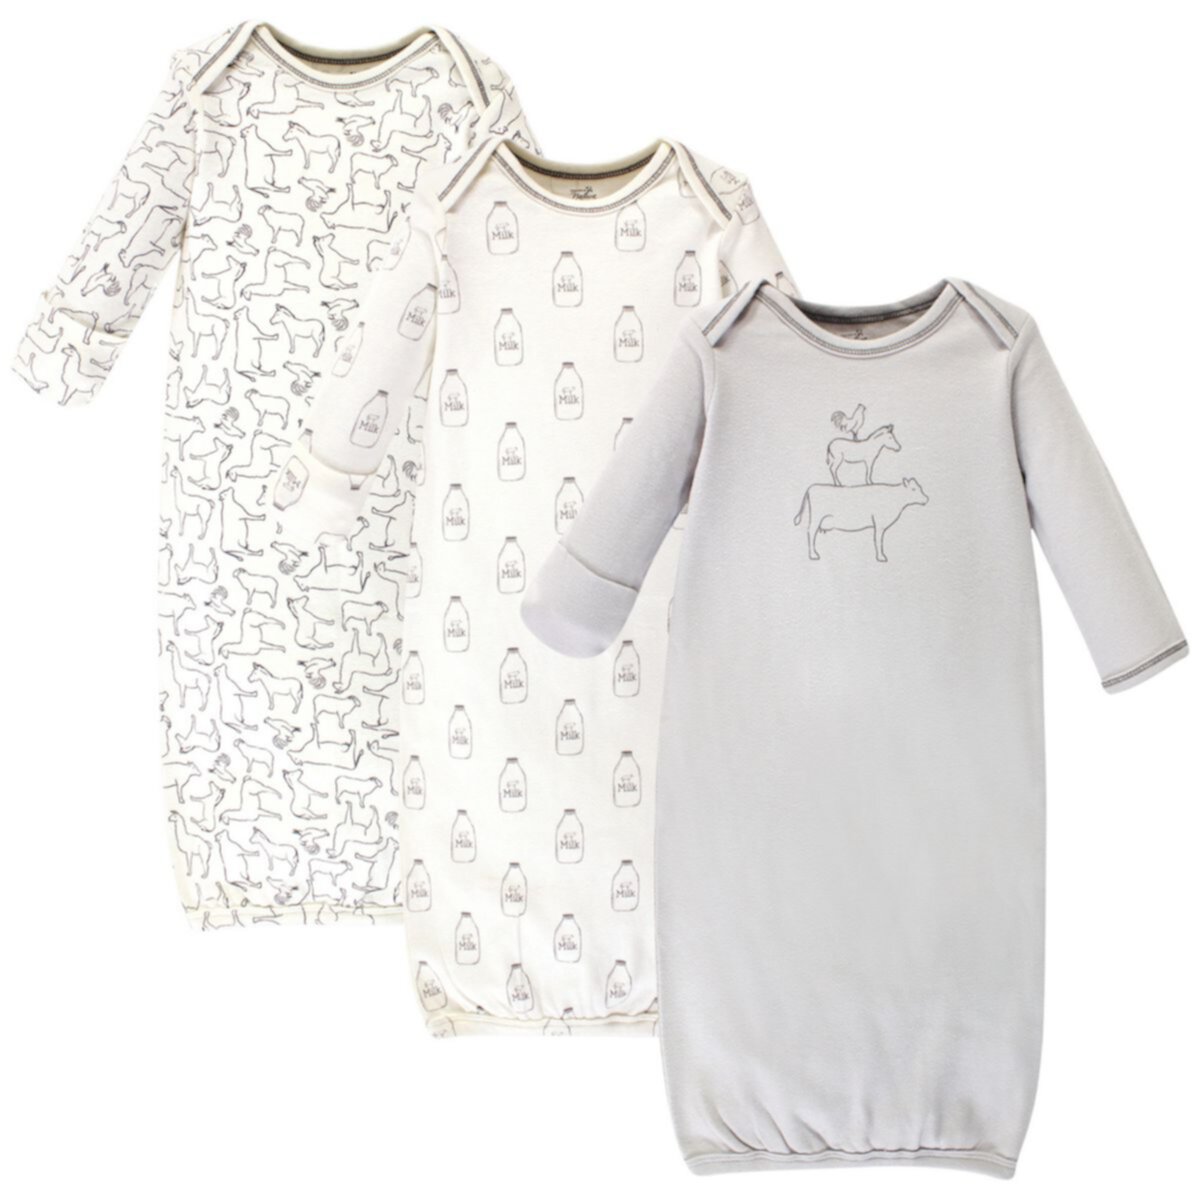 Baby Organic Cotton Long-Sleeve Gowns 3pk, Farm Friends Touched by Nature